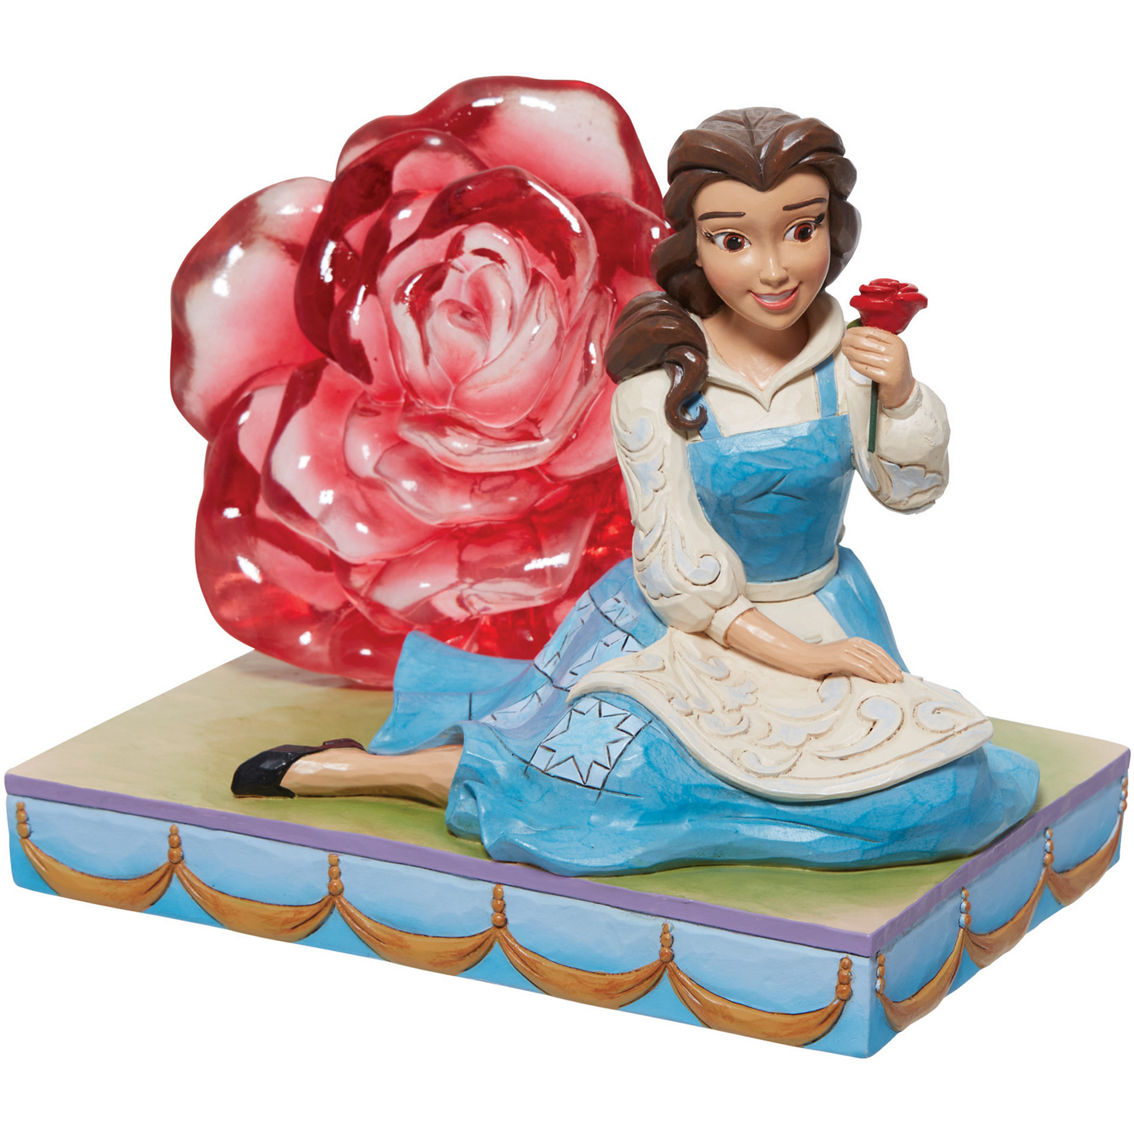 Jim Shore Disney Traditions Belle Clear Resin Rose - Image 3 of 3